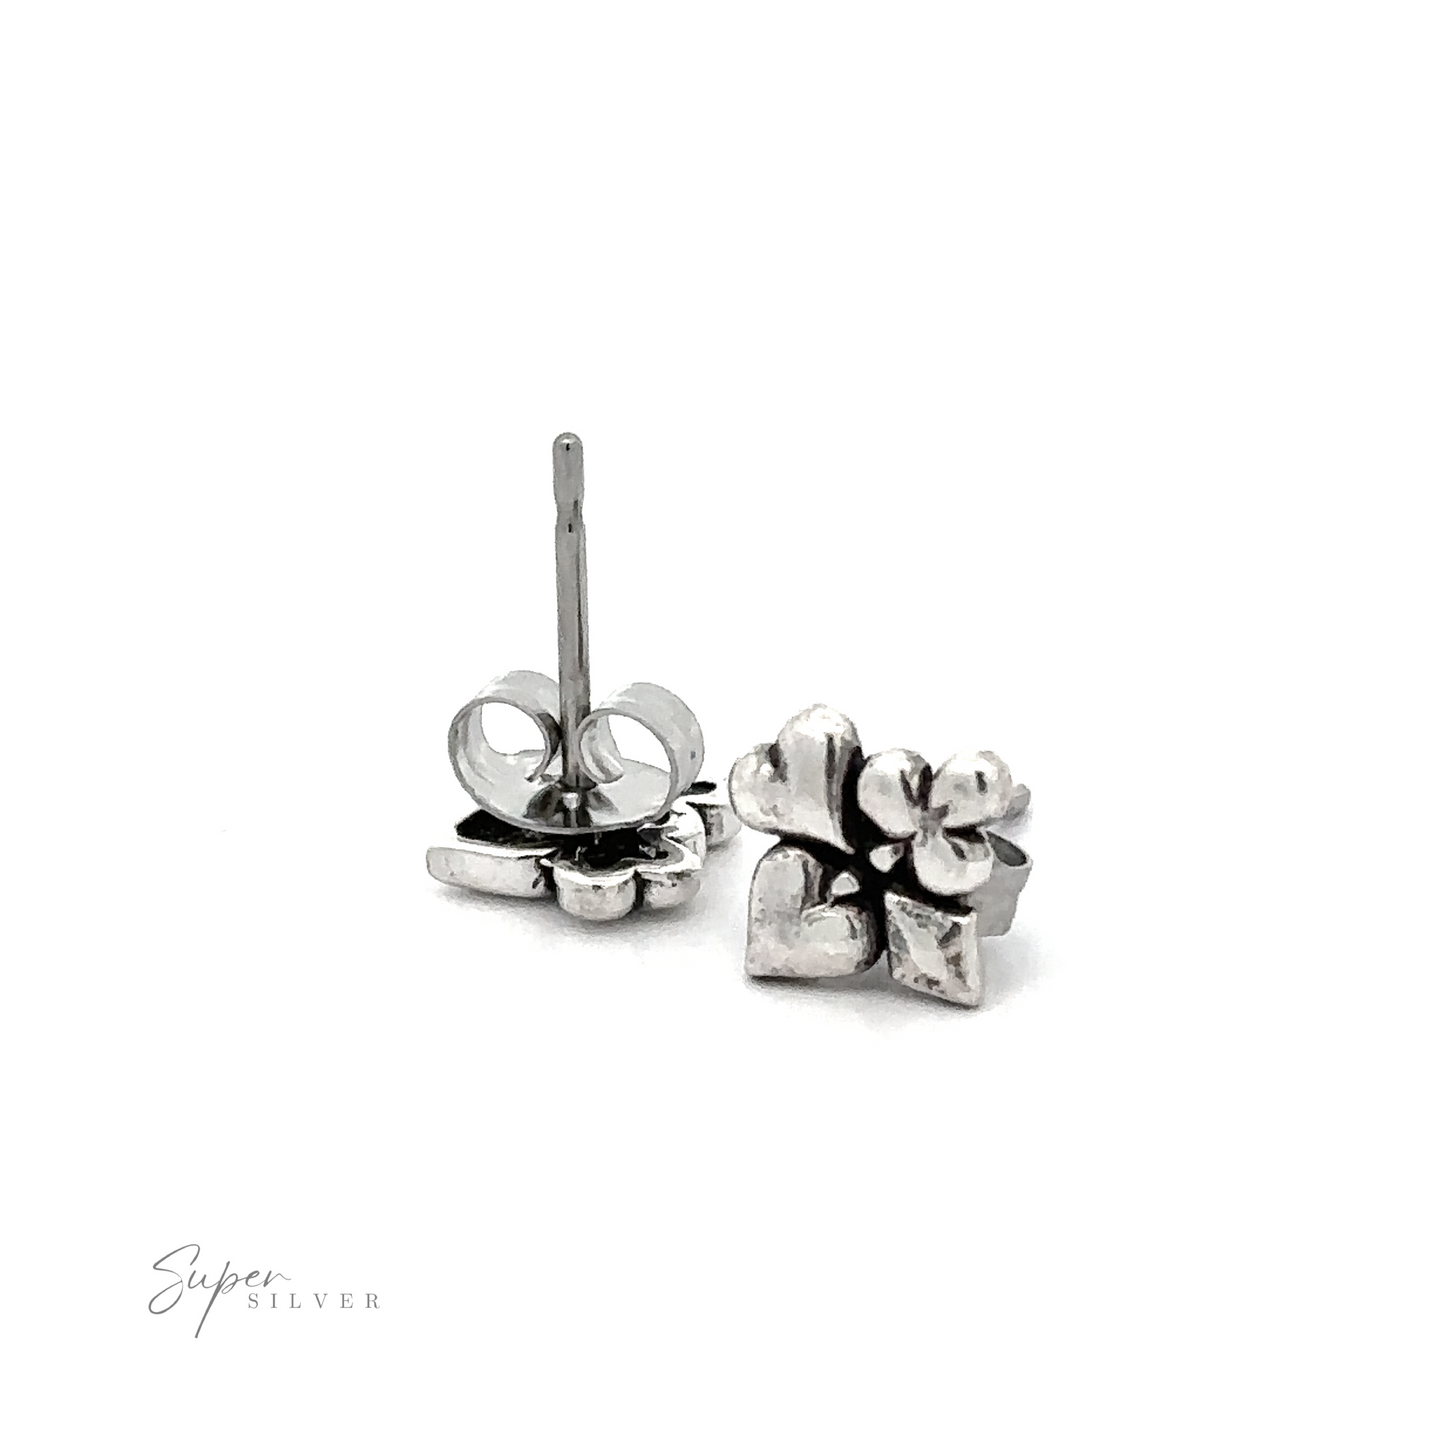 A pair of Deck of Card Suits Studs on a white background, perfect for poker lovers.